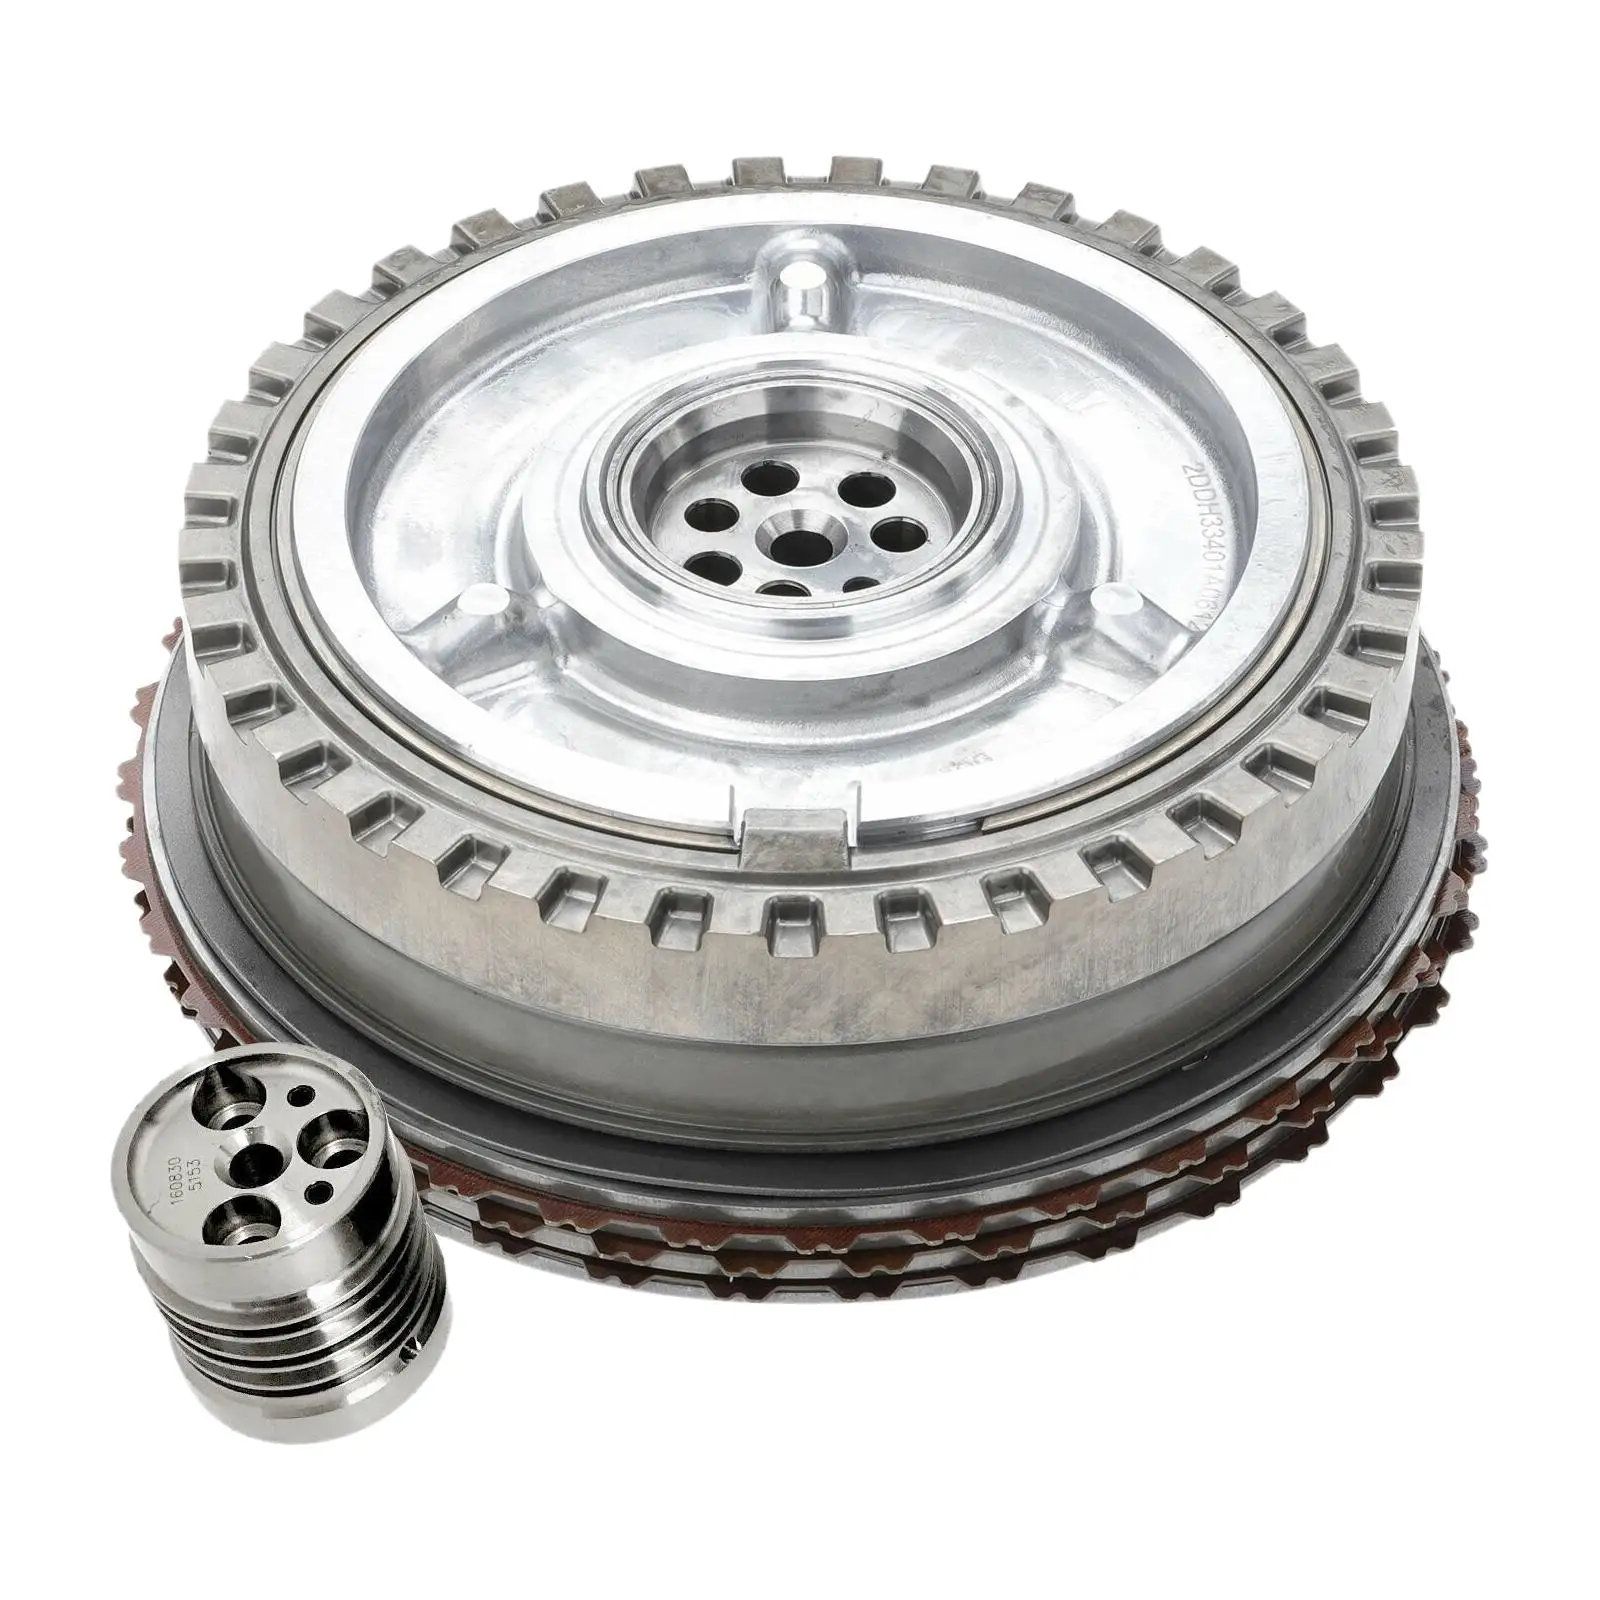 Transmission Clutch Assembly Input Drum 6T30 6T40E 6T45 6T45E 6T30E 6T40 for Chevrolet 2008-2014 Durable Accessory